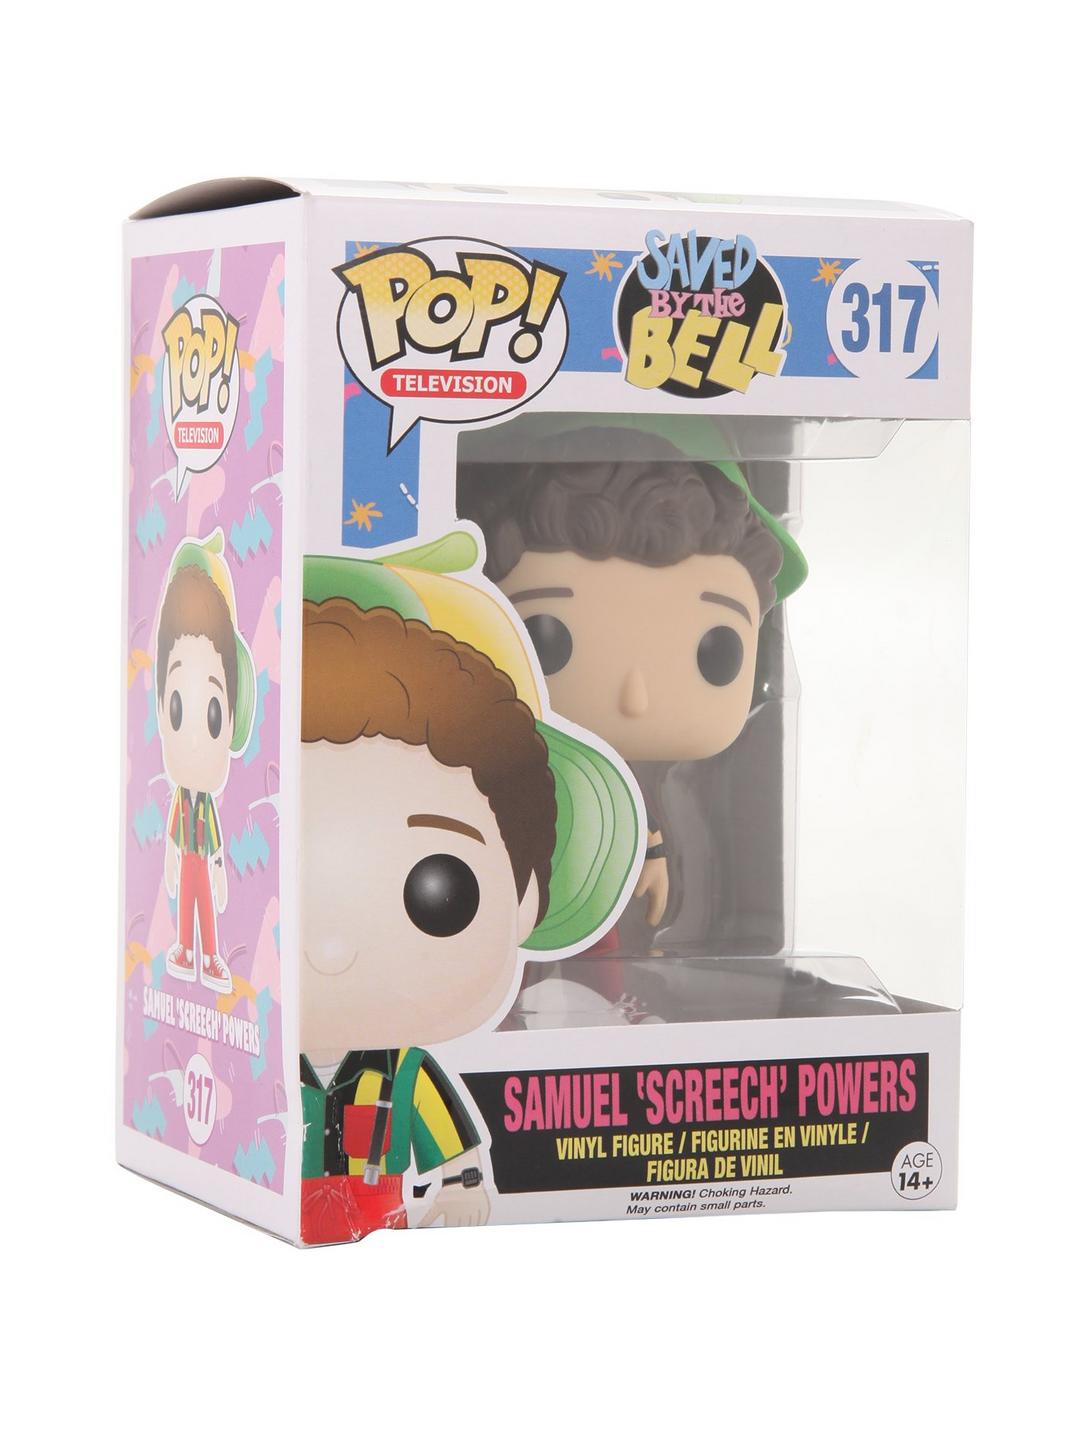 Funko Saved By The Bell Pop! Television Samuel "Screech" Powers Vinyl Figure, , hi-res